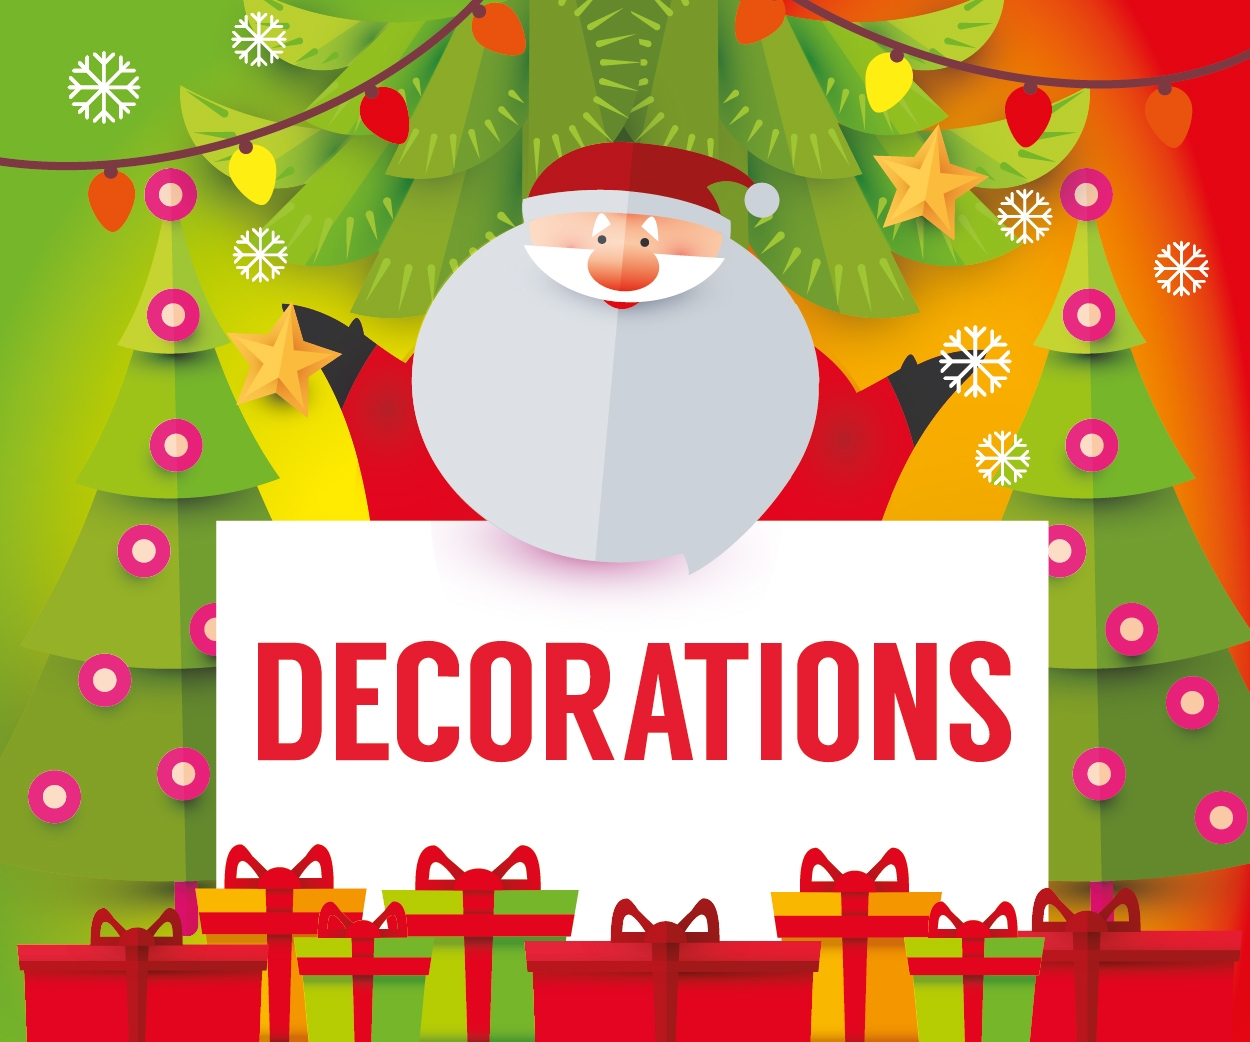 Christmas Decorations Sale Online Uk  When Should You Take Your